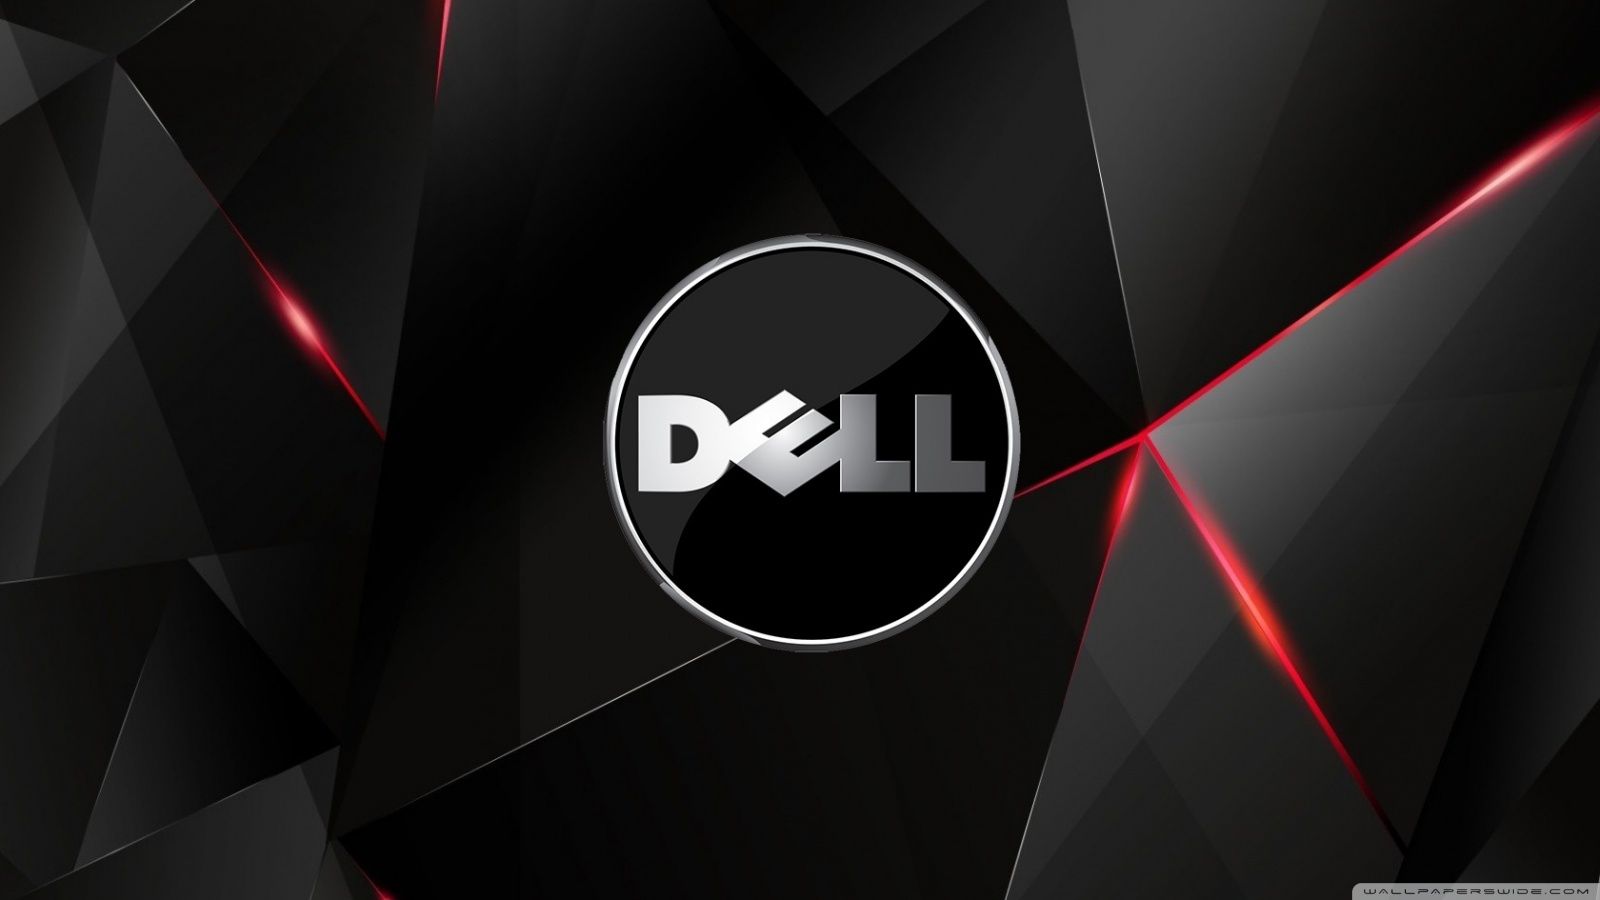 2160p Dell Wallpaper Top Background